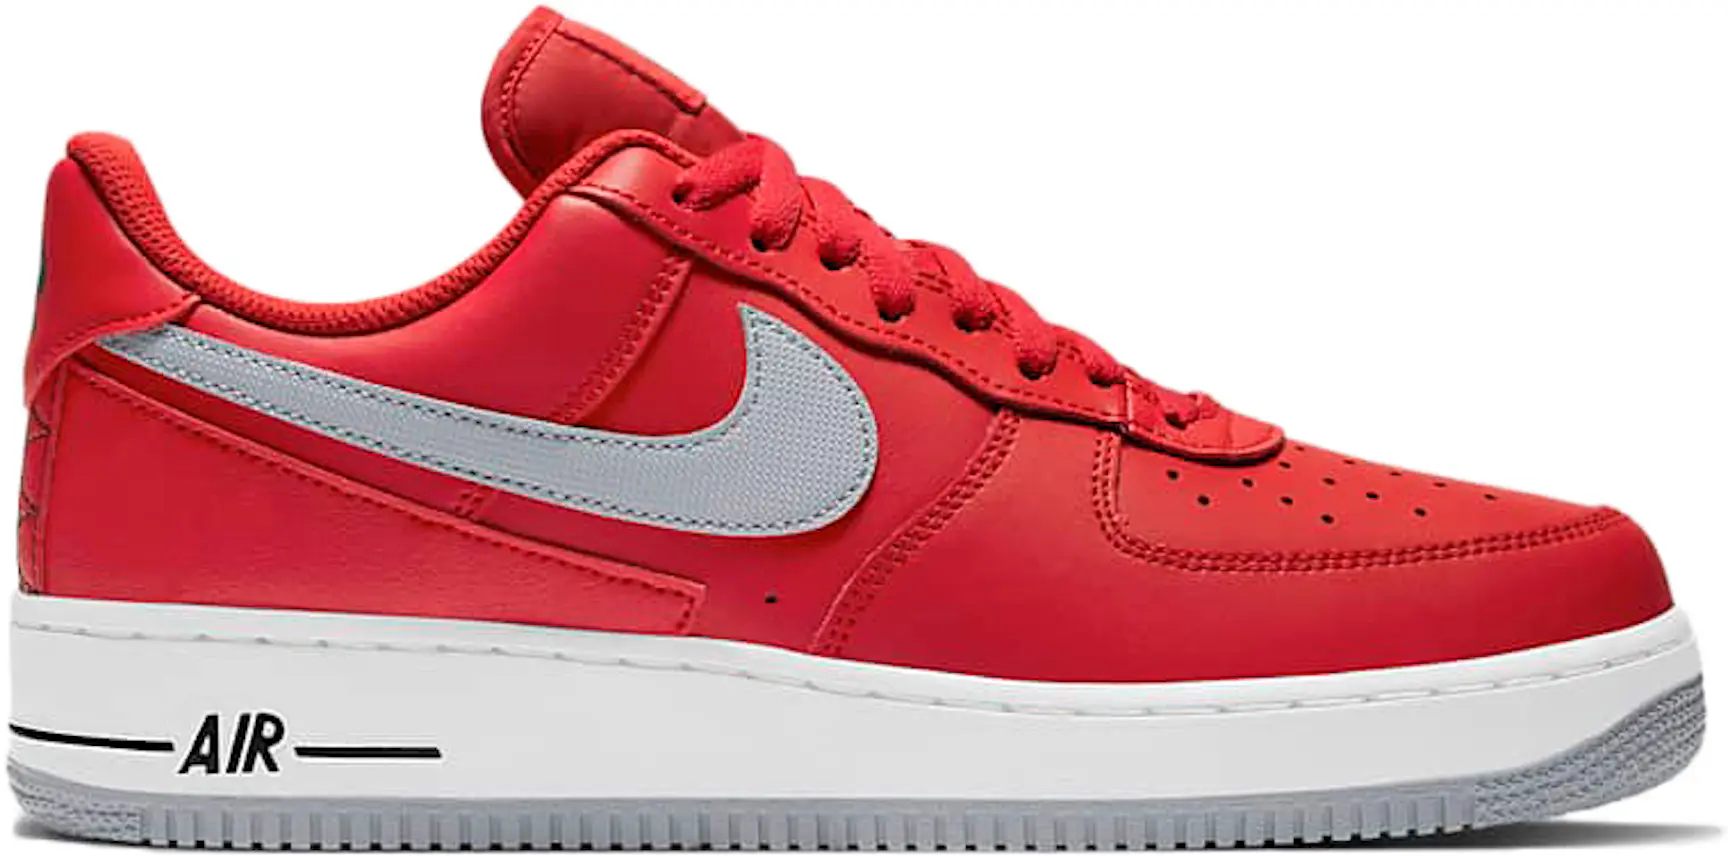 Nike Air Force 1 Low Technical Stitch University Red Men's - DD7113-600 ...